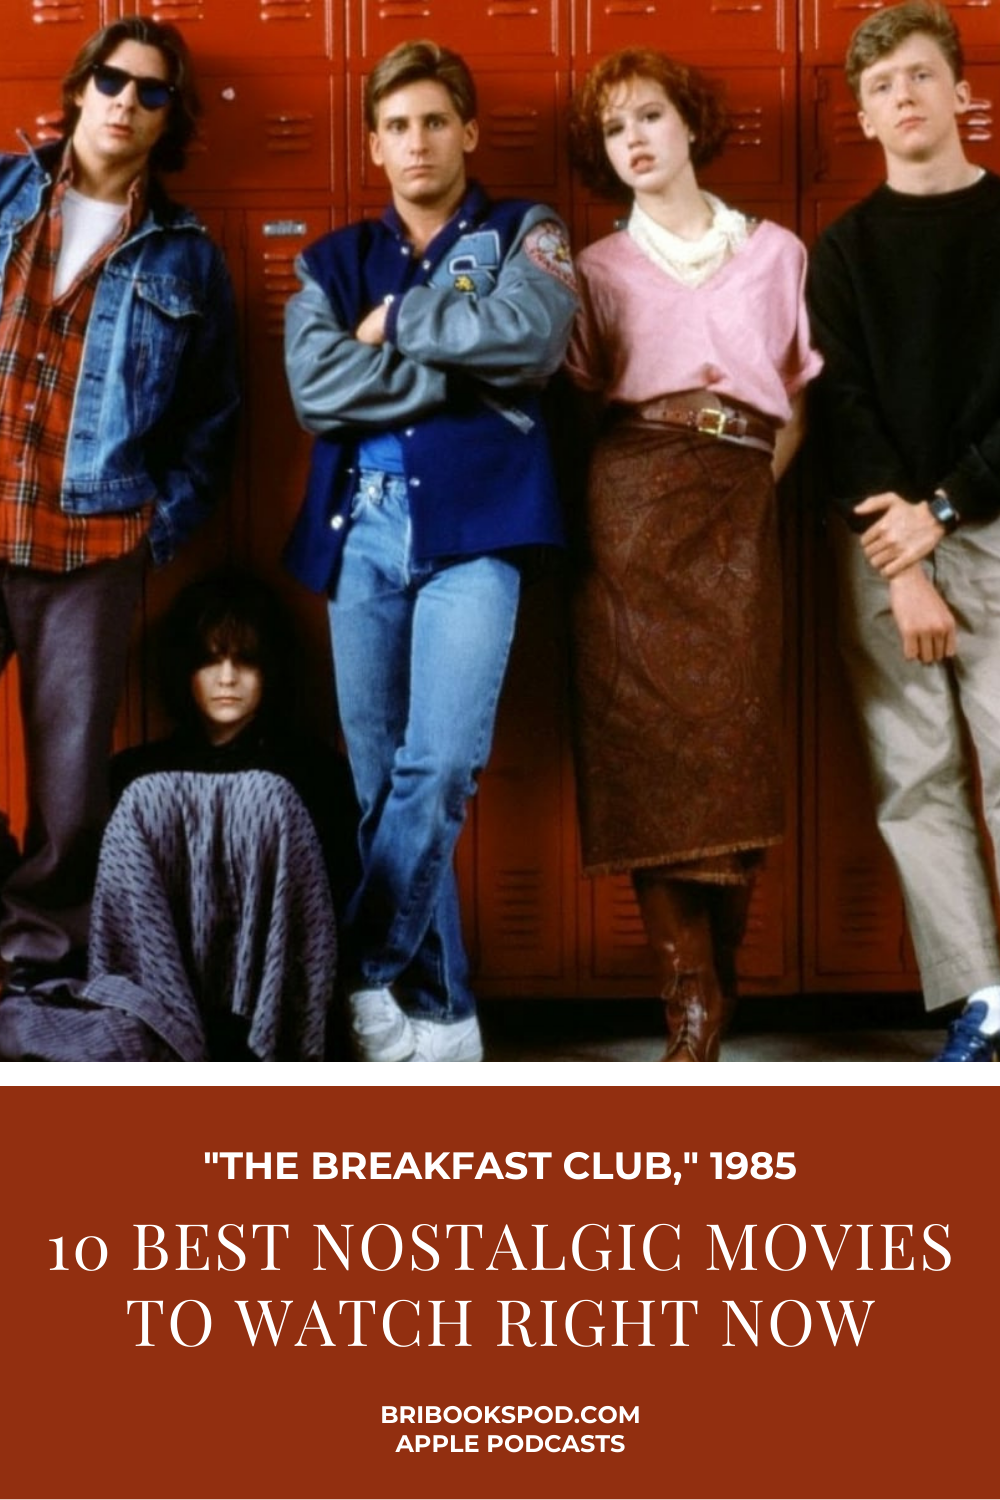 10 Best Nostalgic Movies to Watch Right Now: The Breakfast Club